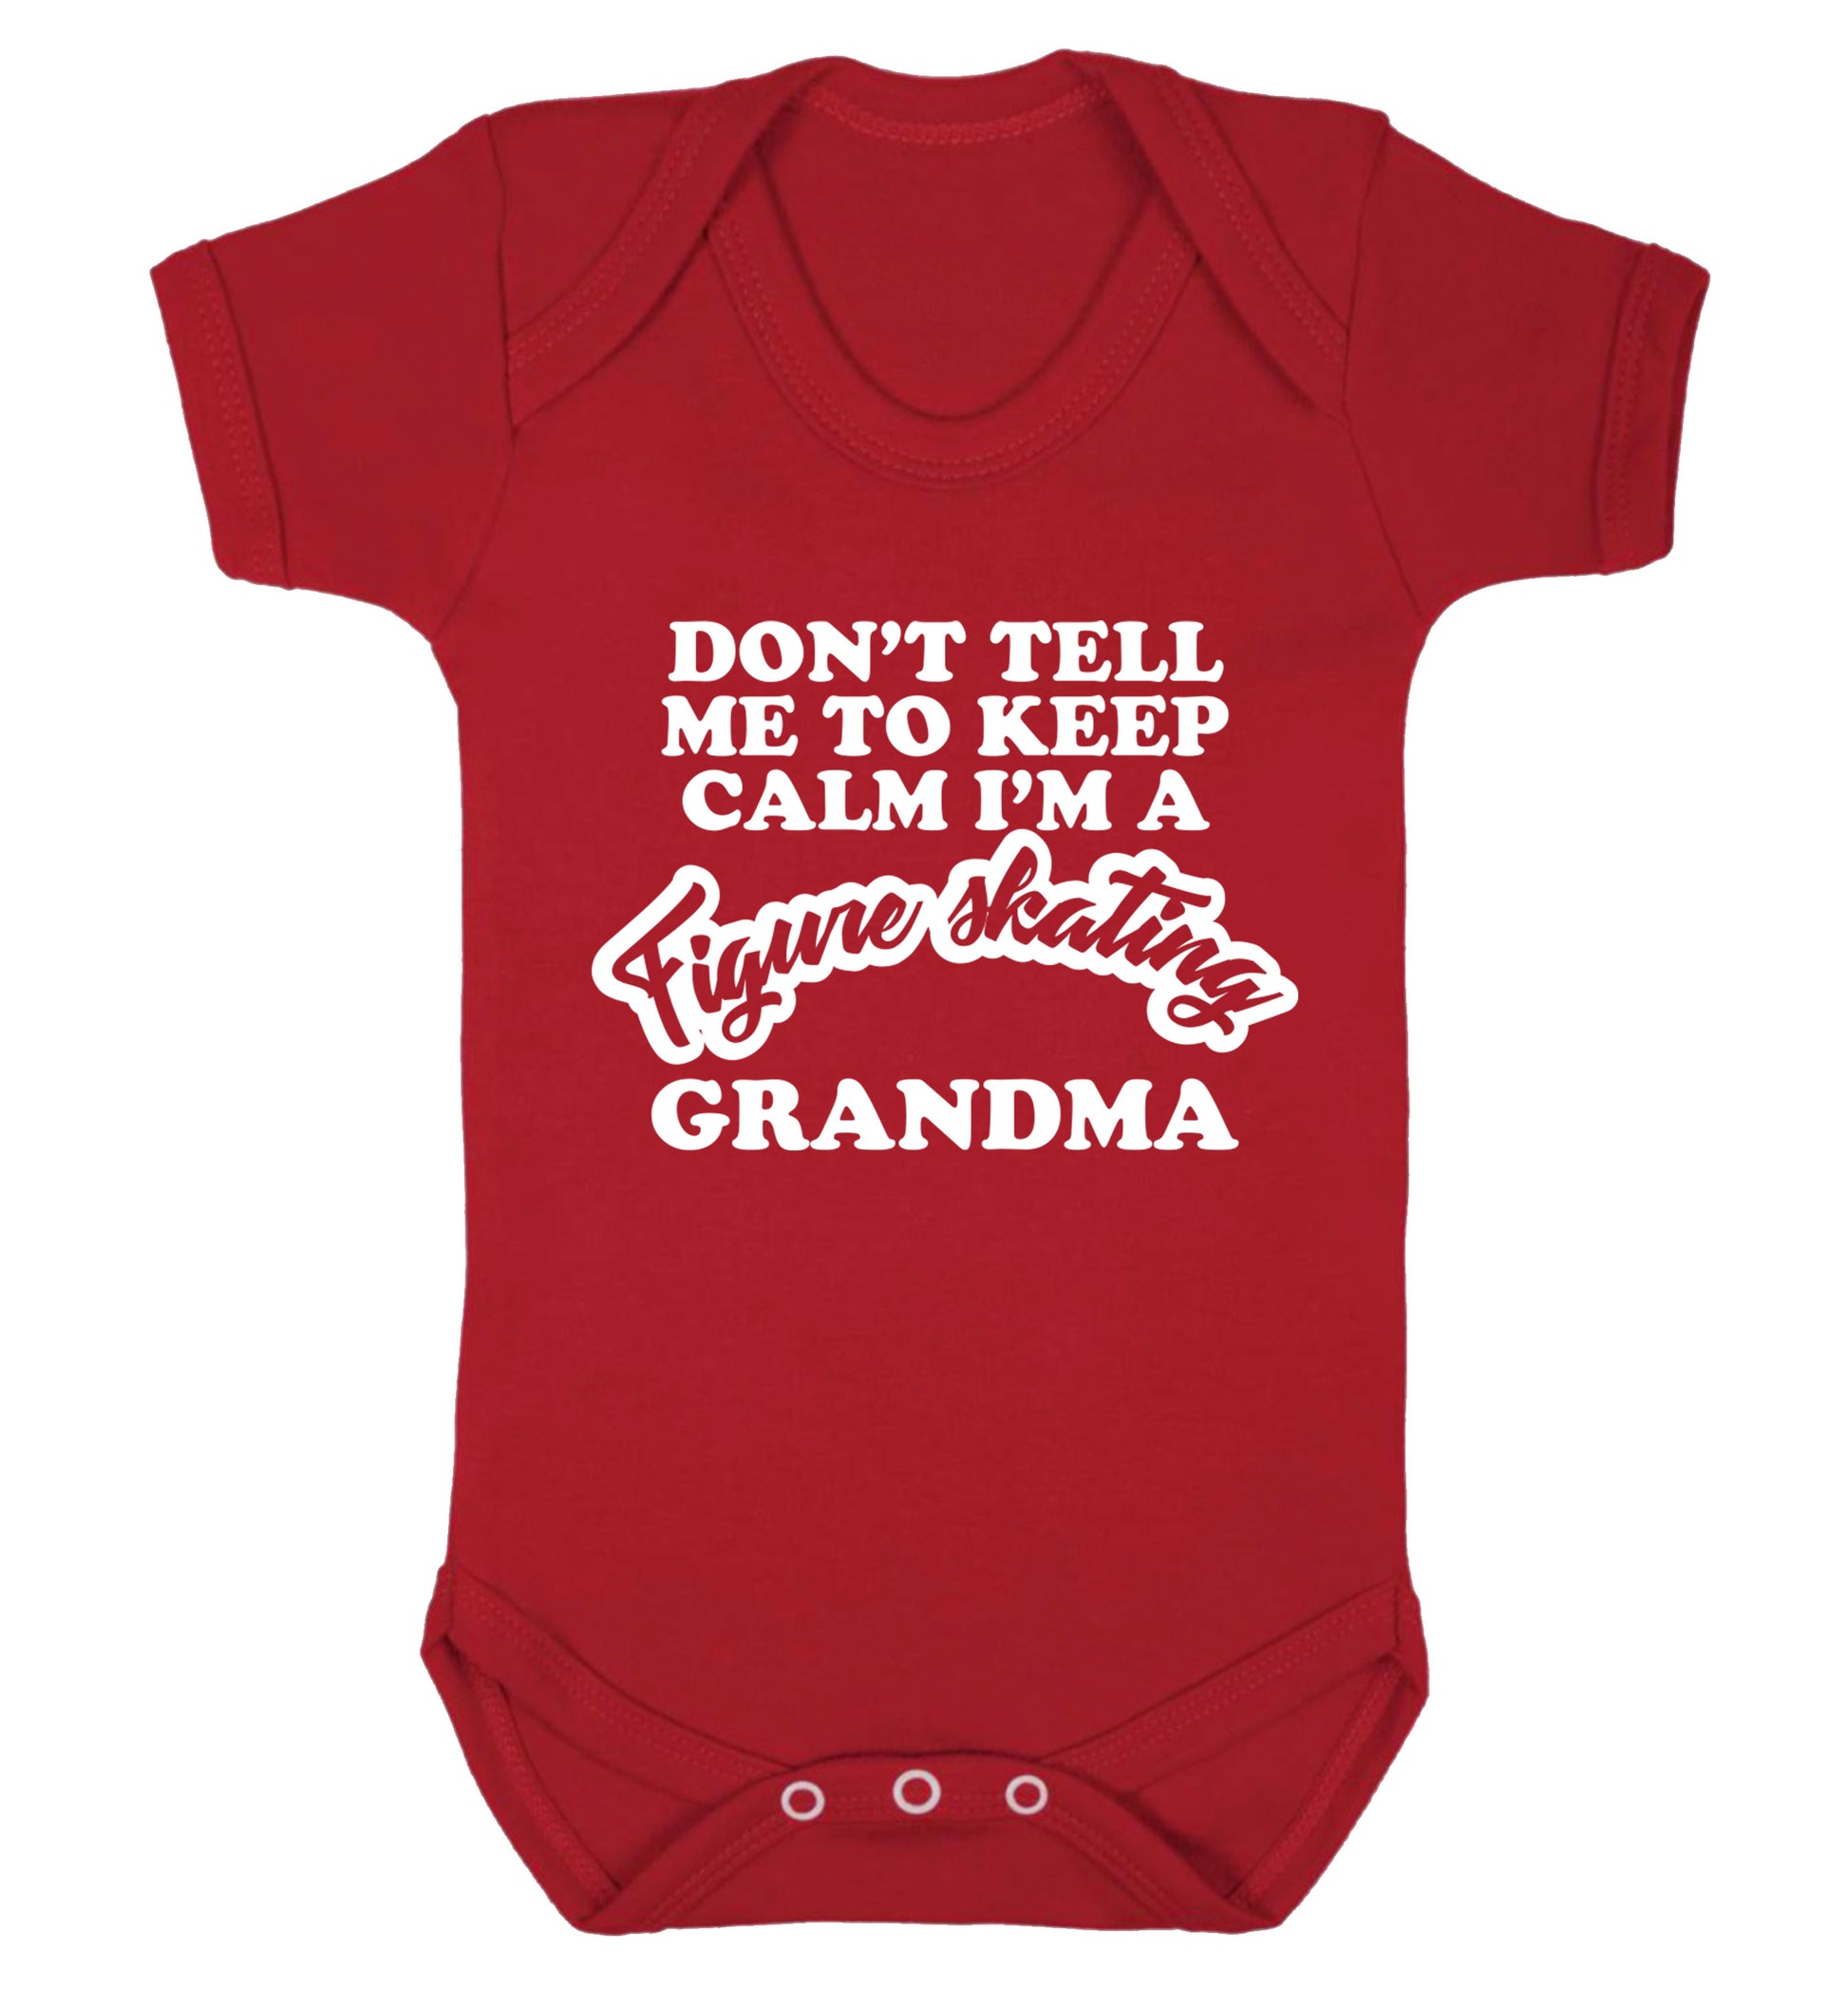 Don't tell me to keep calm I'm a figure skating grandma Baby Vest red 18-24 months